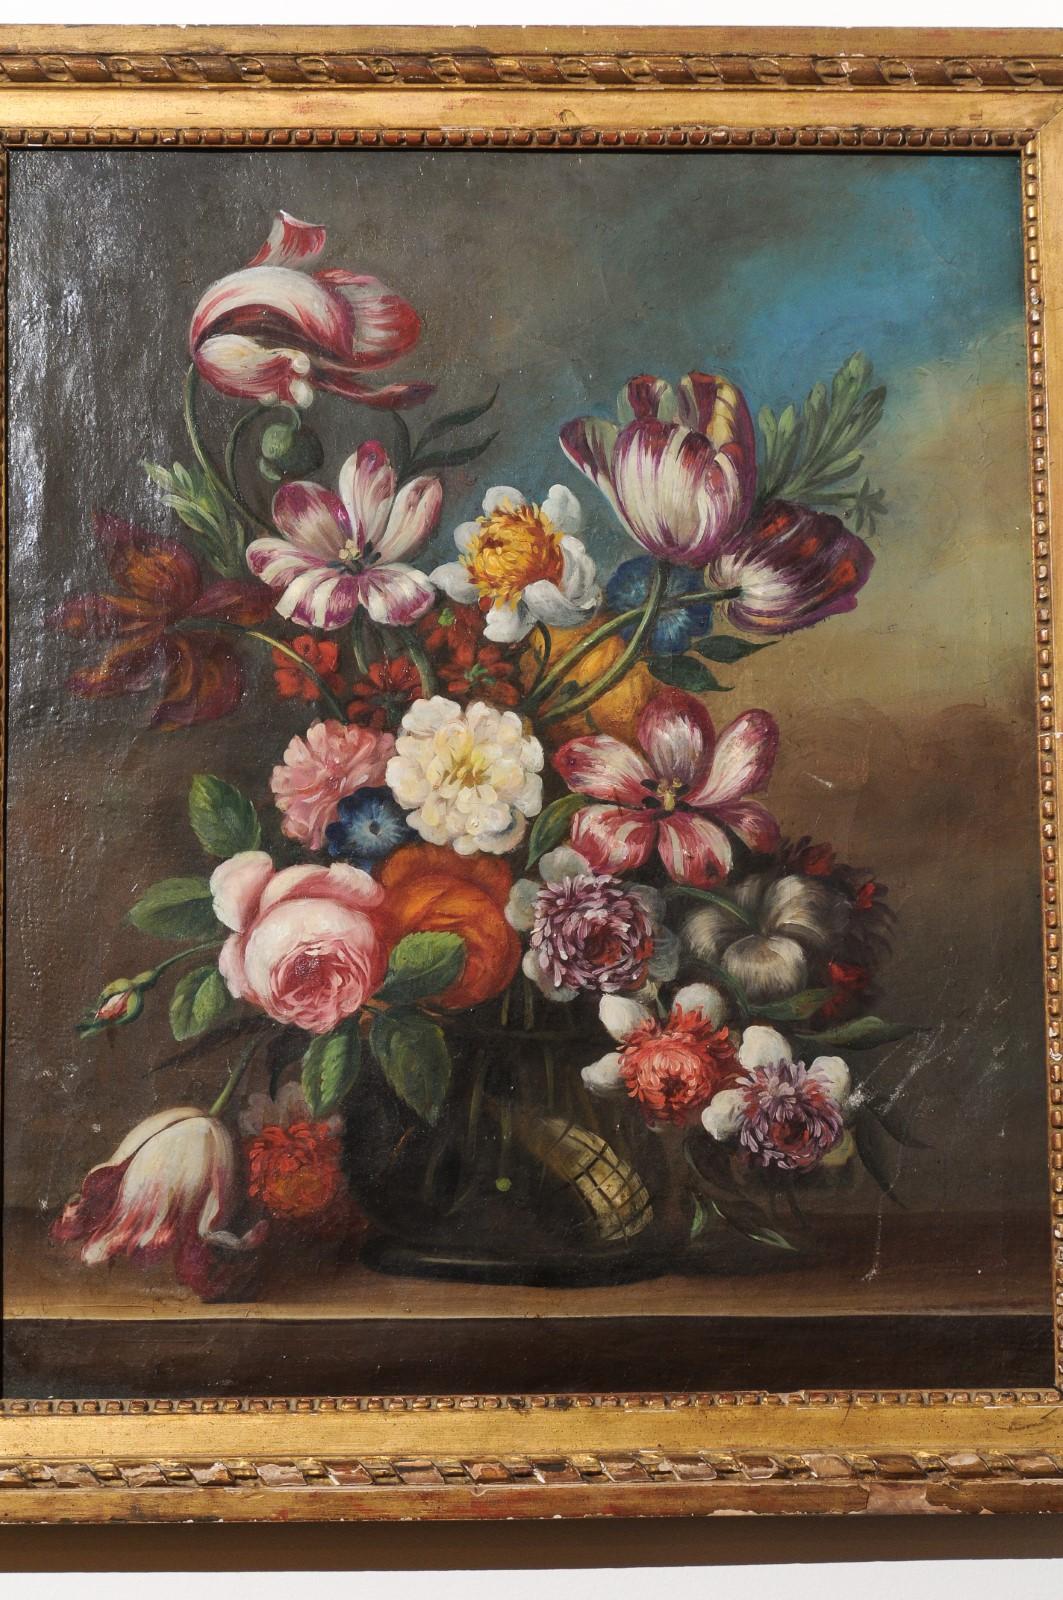 French 18th Century Oil on Canvas Floral Painting in the Dutch School Style In Good Condition For Sale In Atlanta, GA